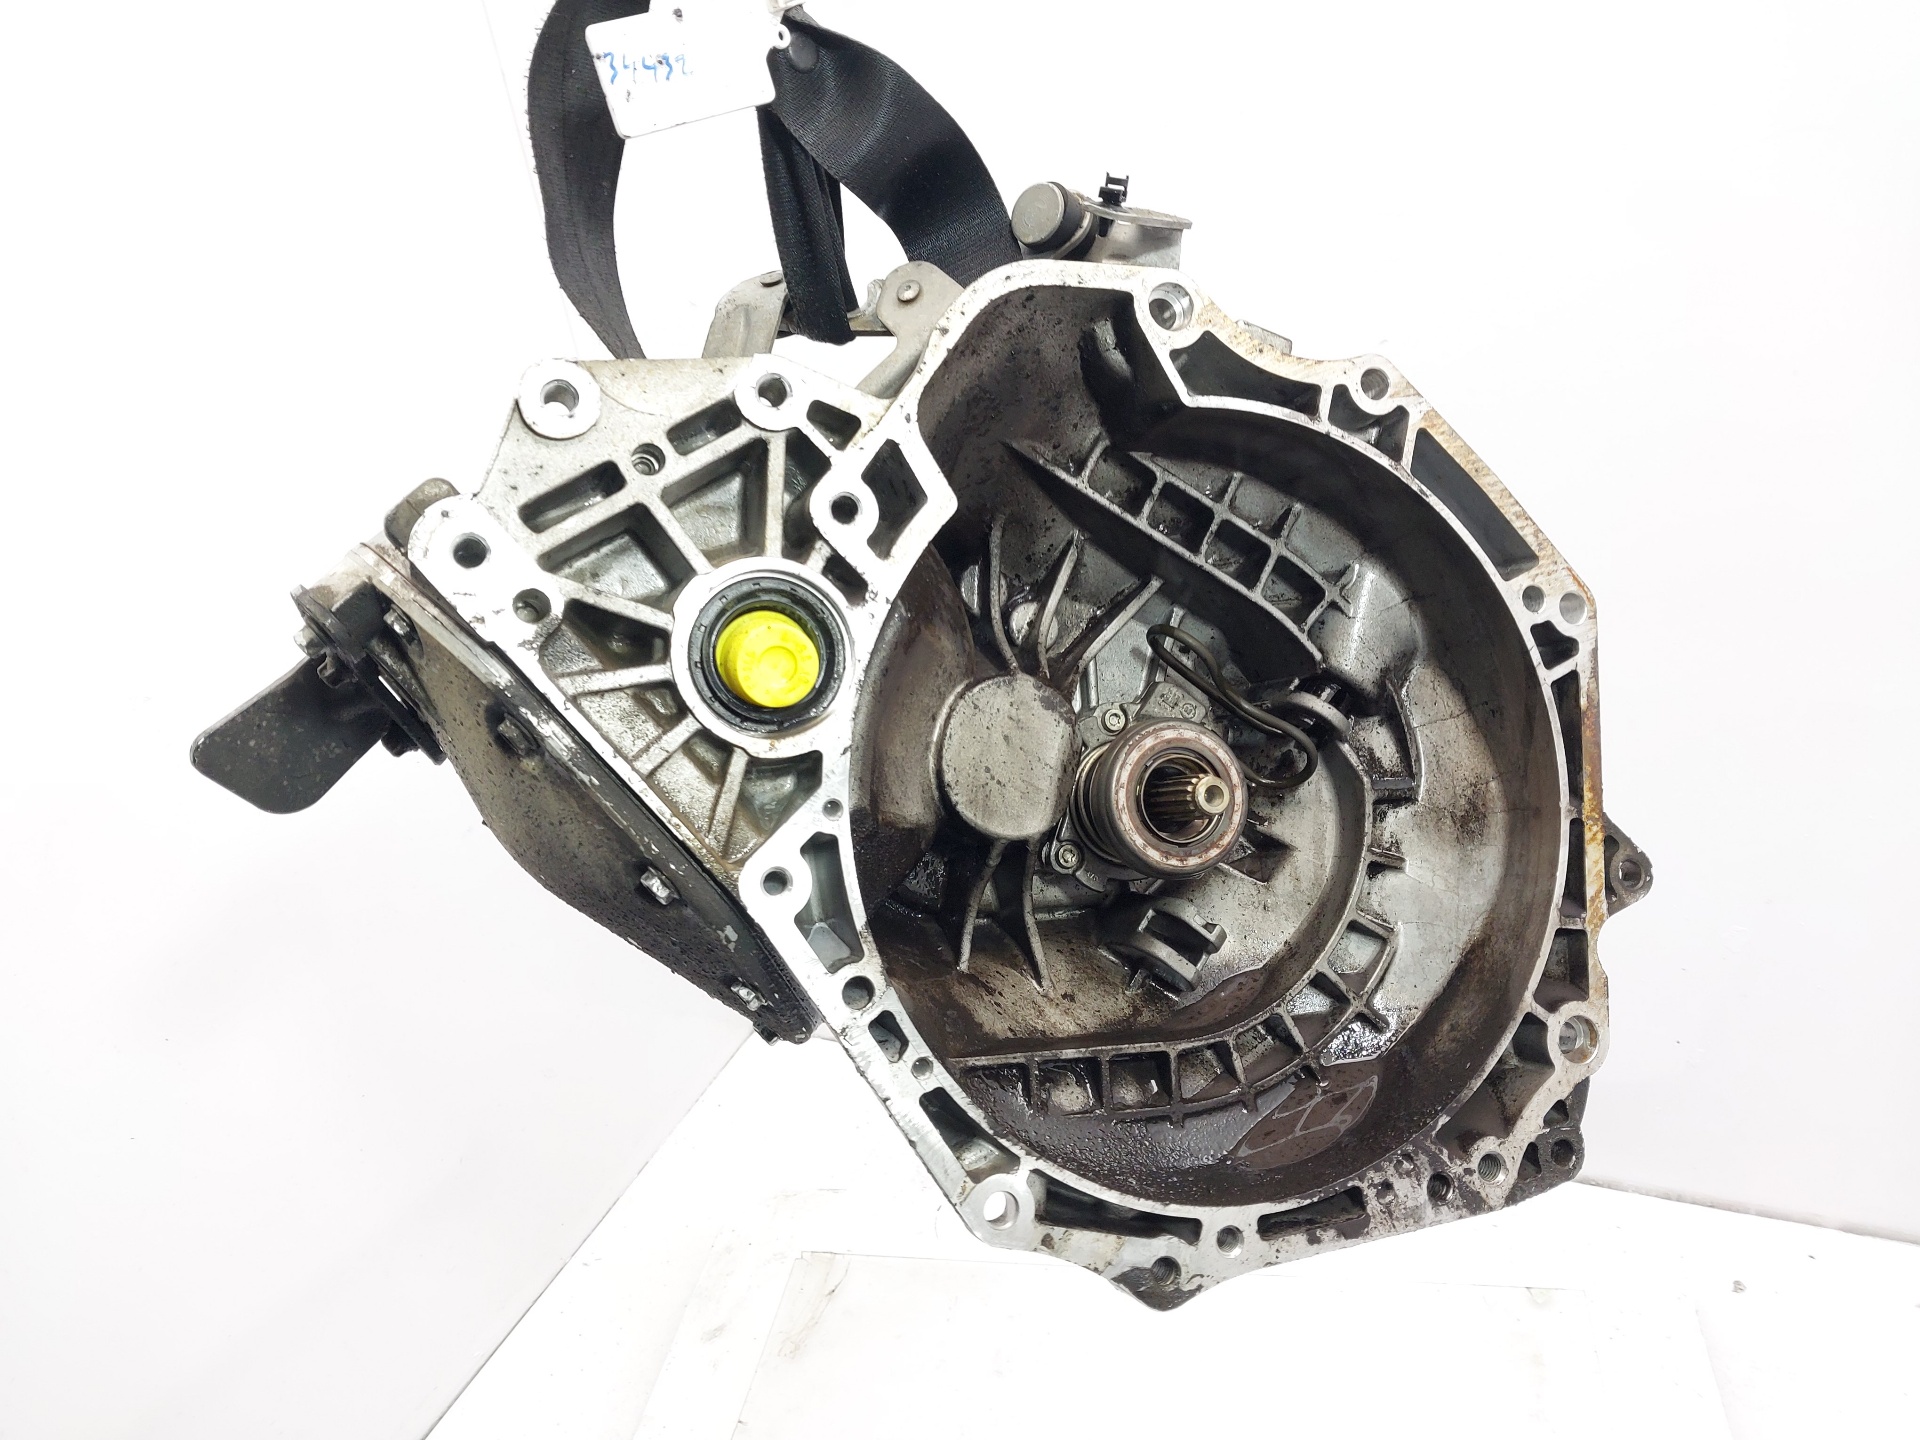 OPEL Vectra 7 generation (2005-2015) Gearbox F17C374, 5VELOCIDADES 24786788